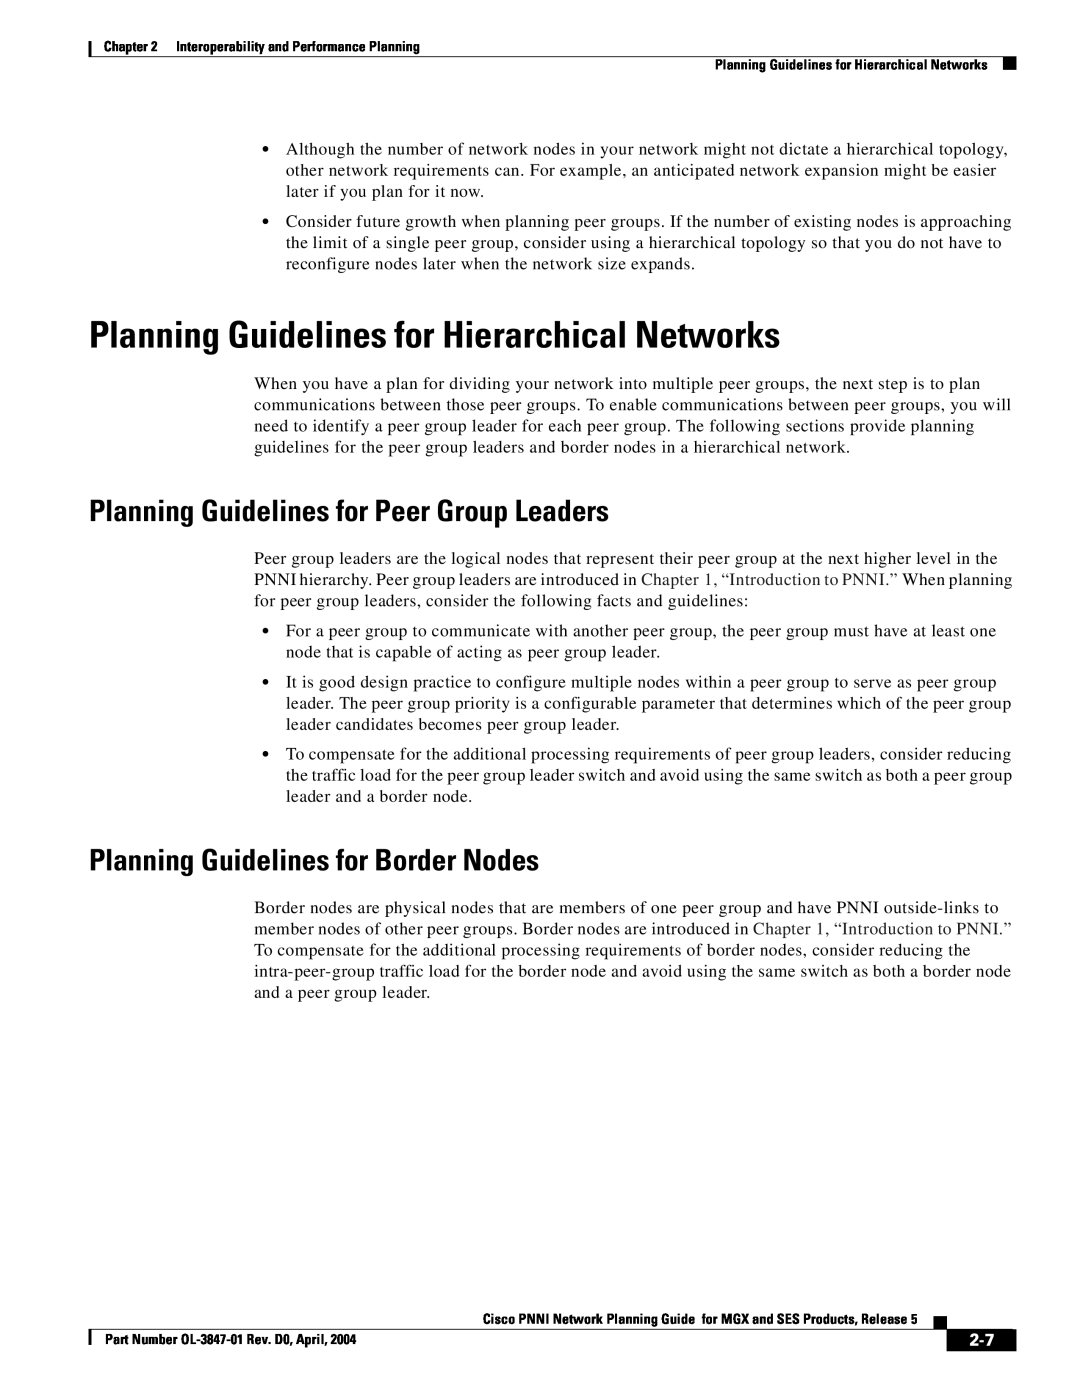 Cisco Systems Network Router Planning Guidelines for Hierarchical Networks, Planning Guidelines for Peer Group Leaders 